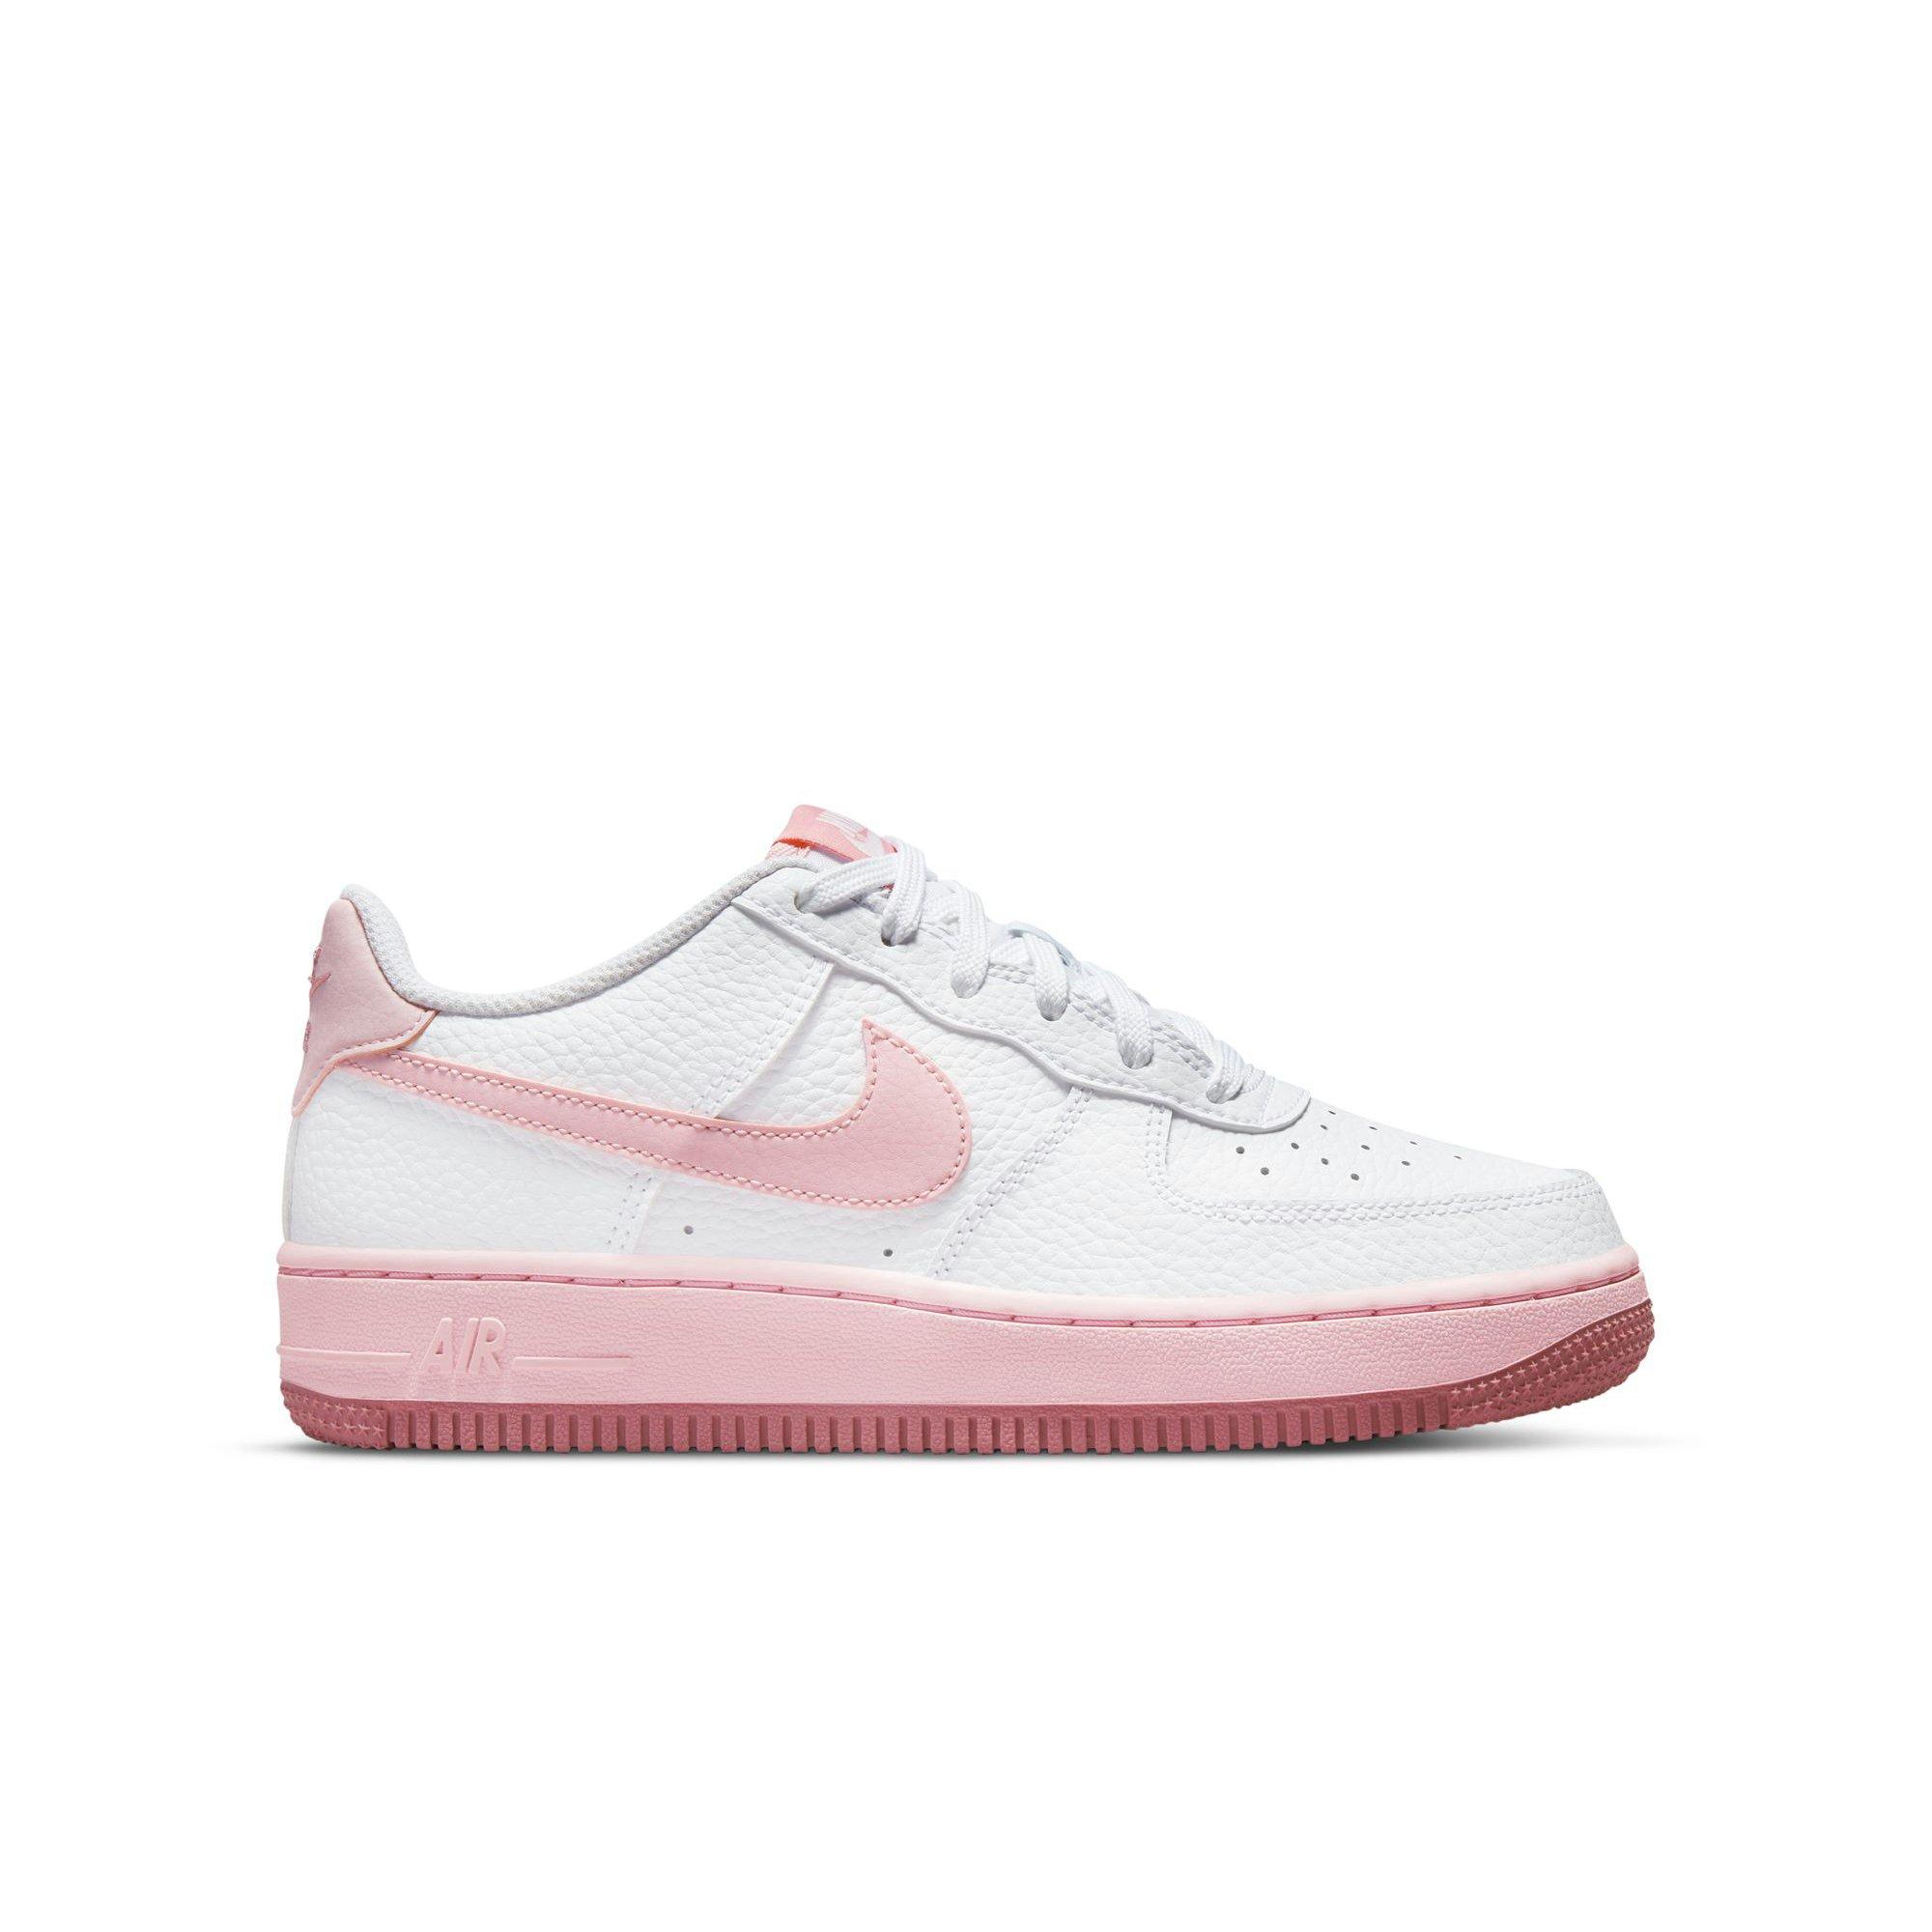 pink air force ones girls